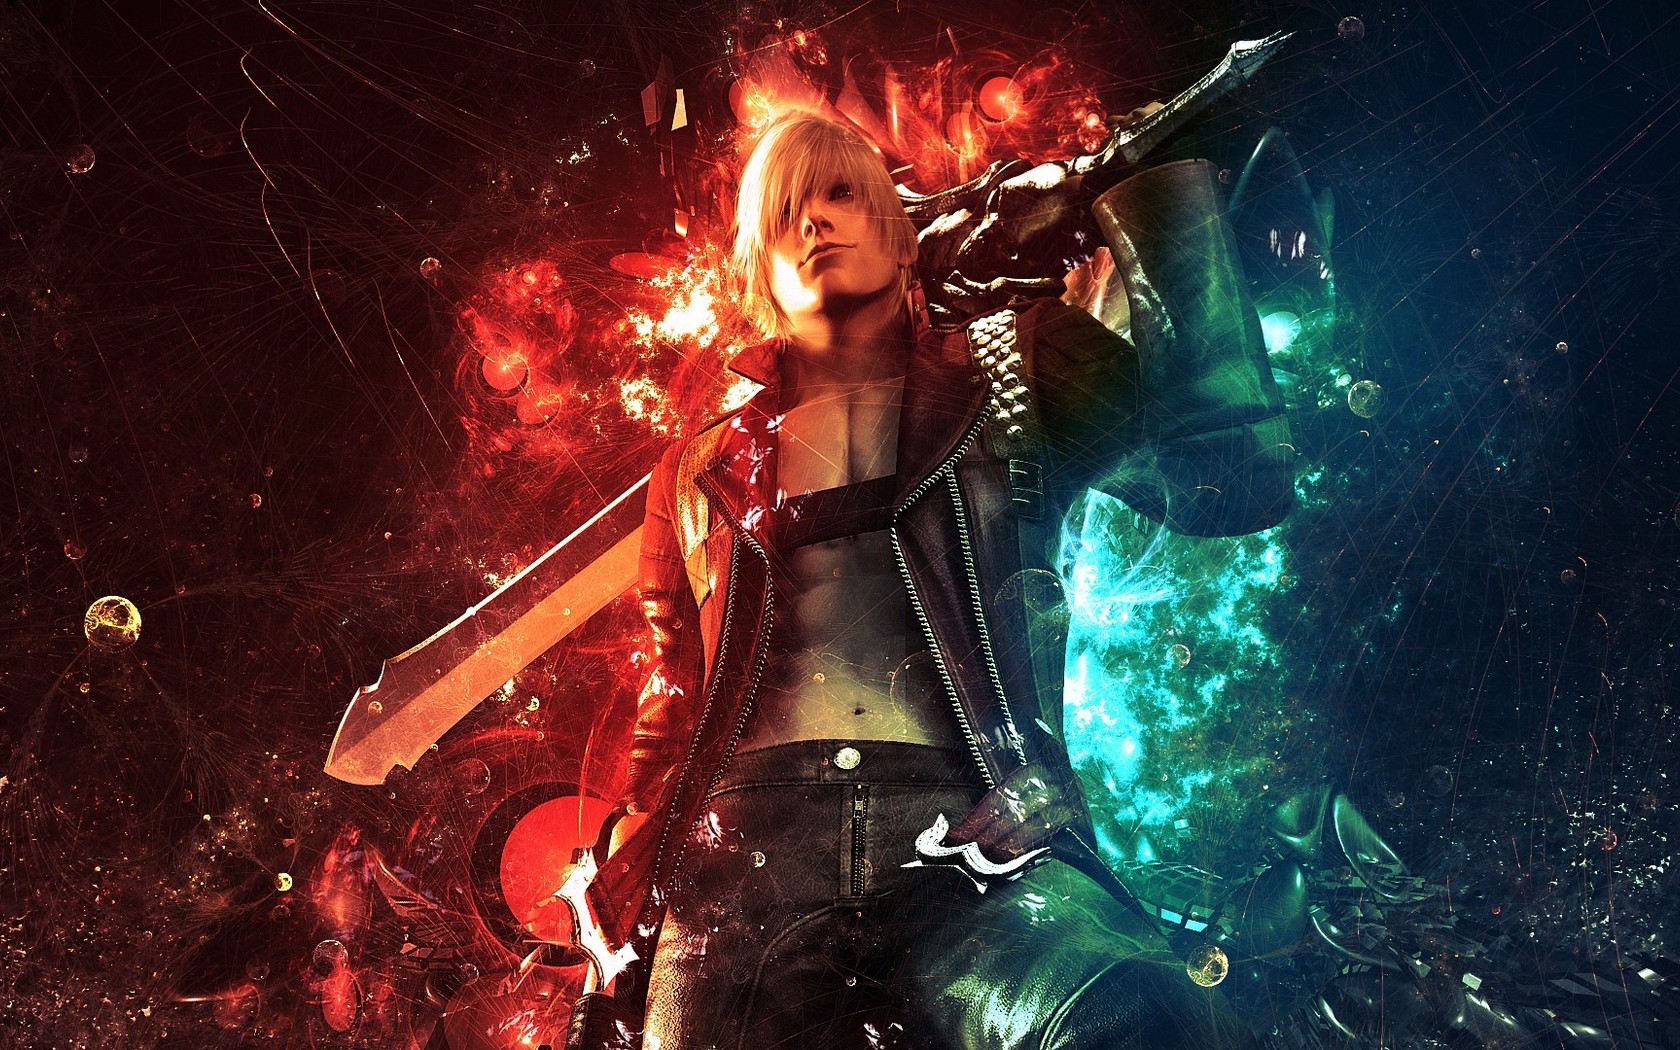 Devil May Cry Backgrounds, Compatible - PC, Mobile, Gadgets| 1680x1050 px